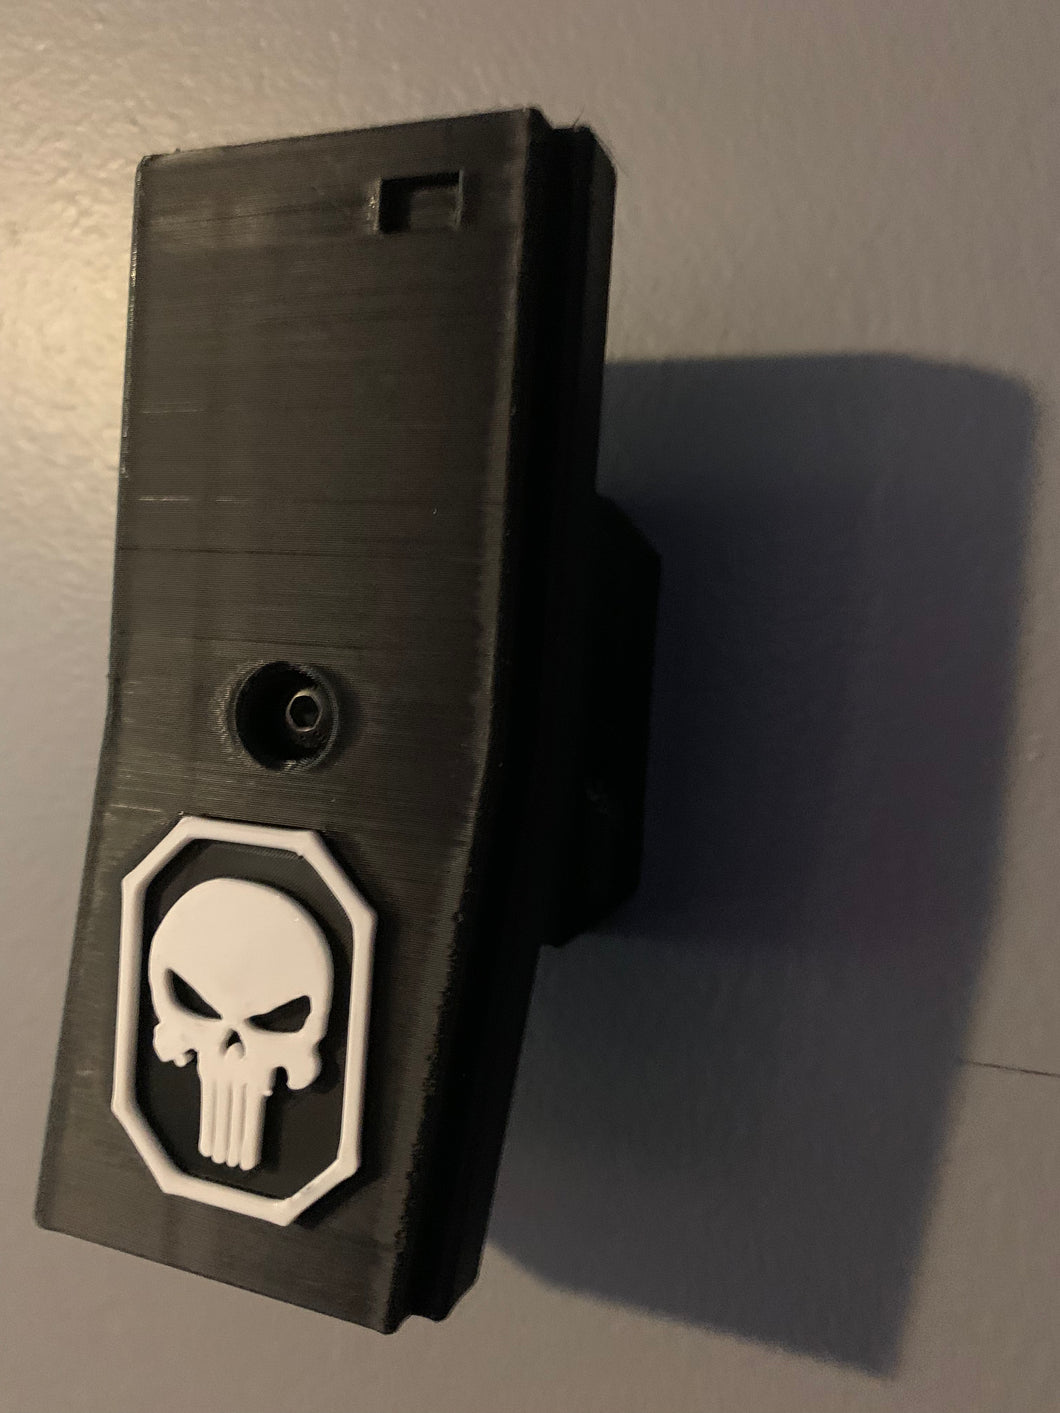 M4/M16 airsoft wall mount